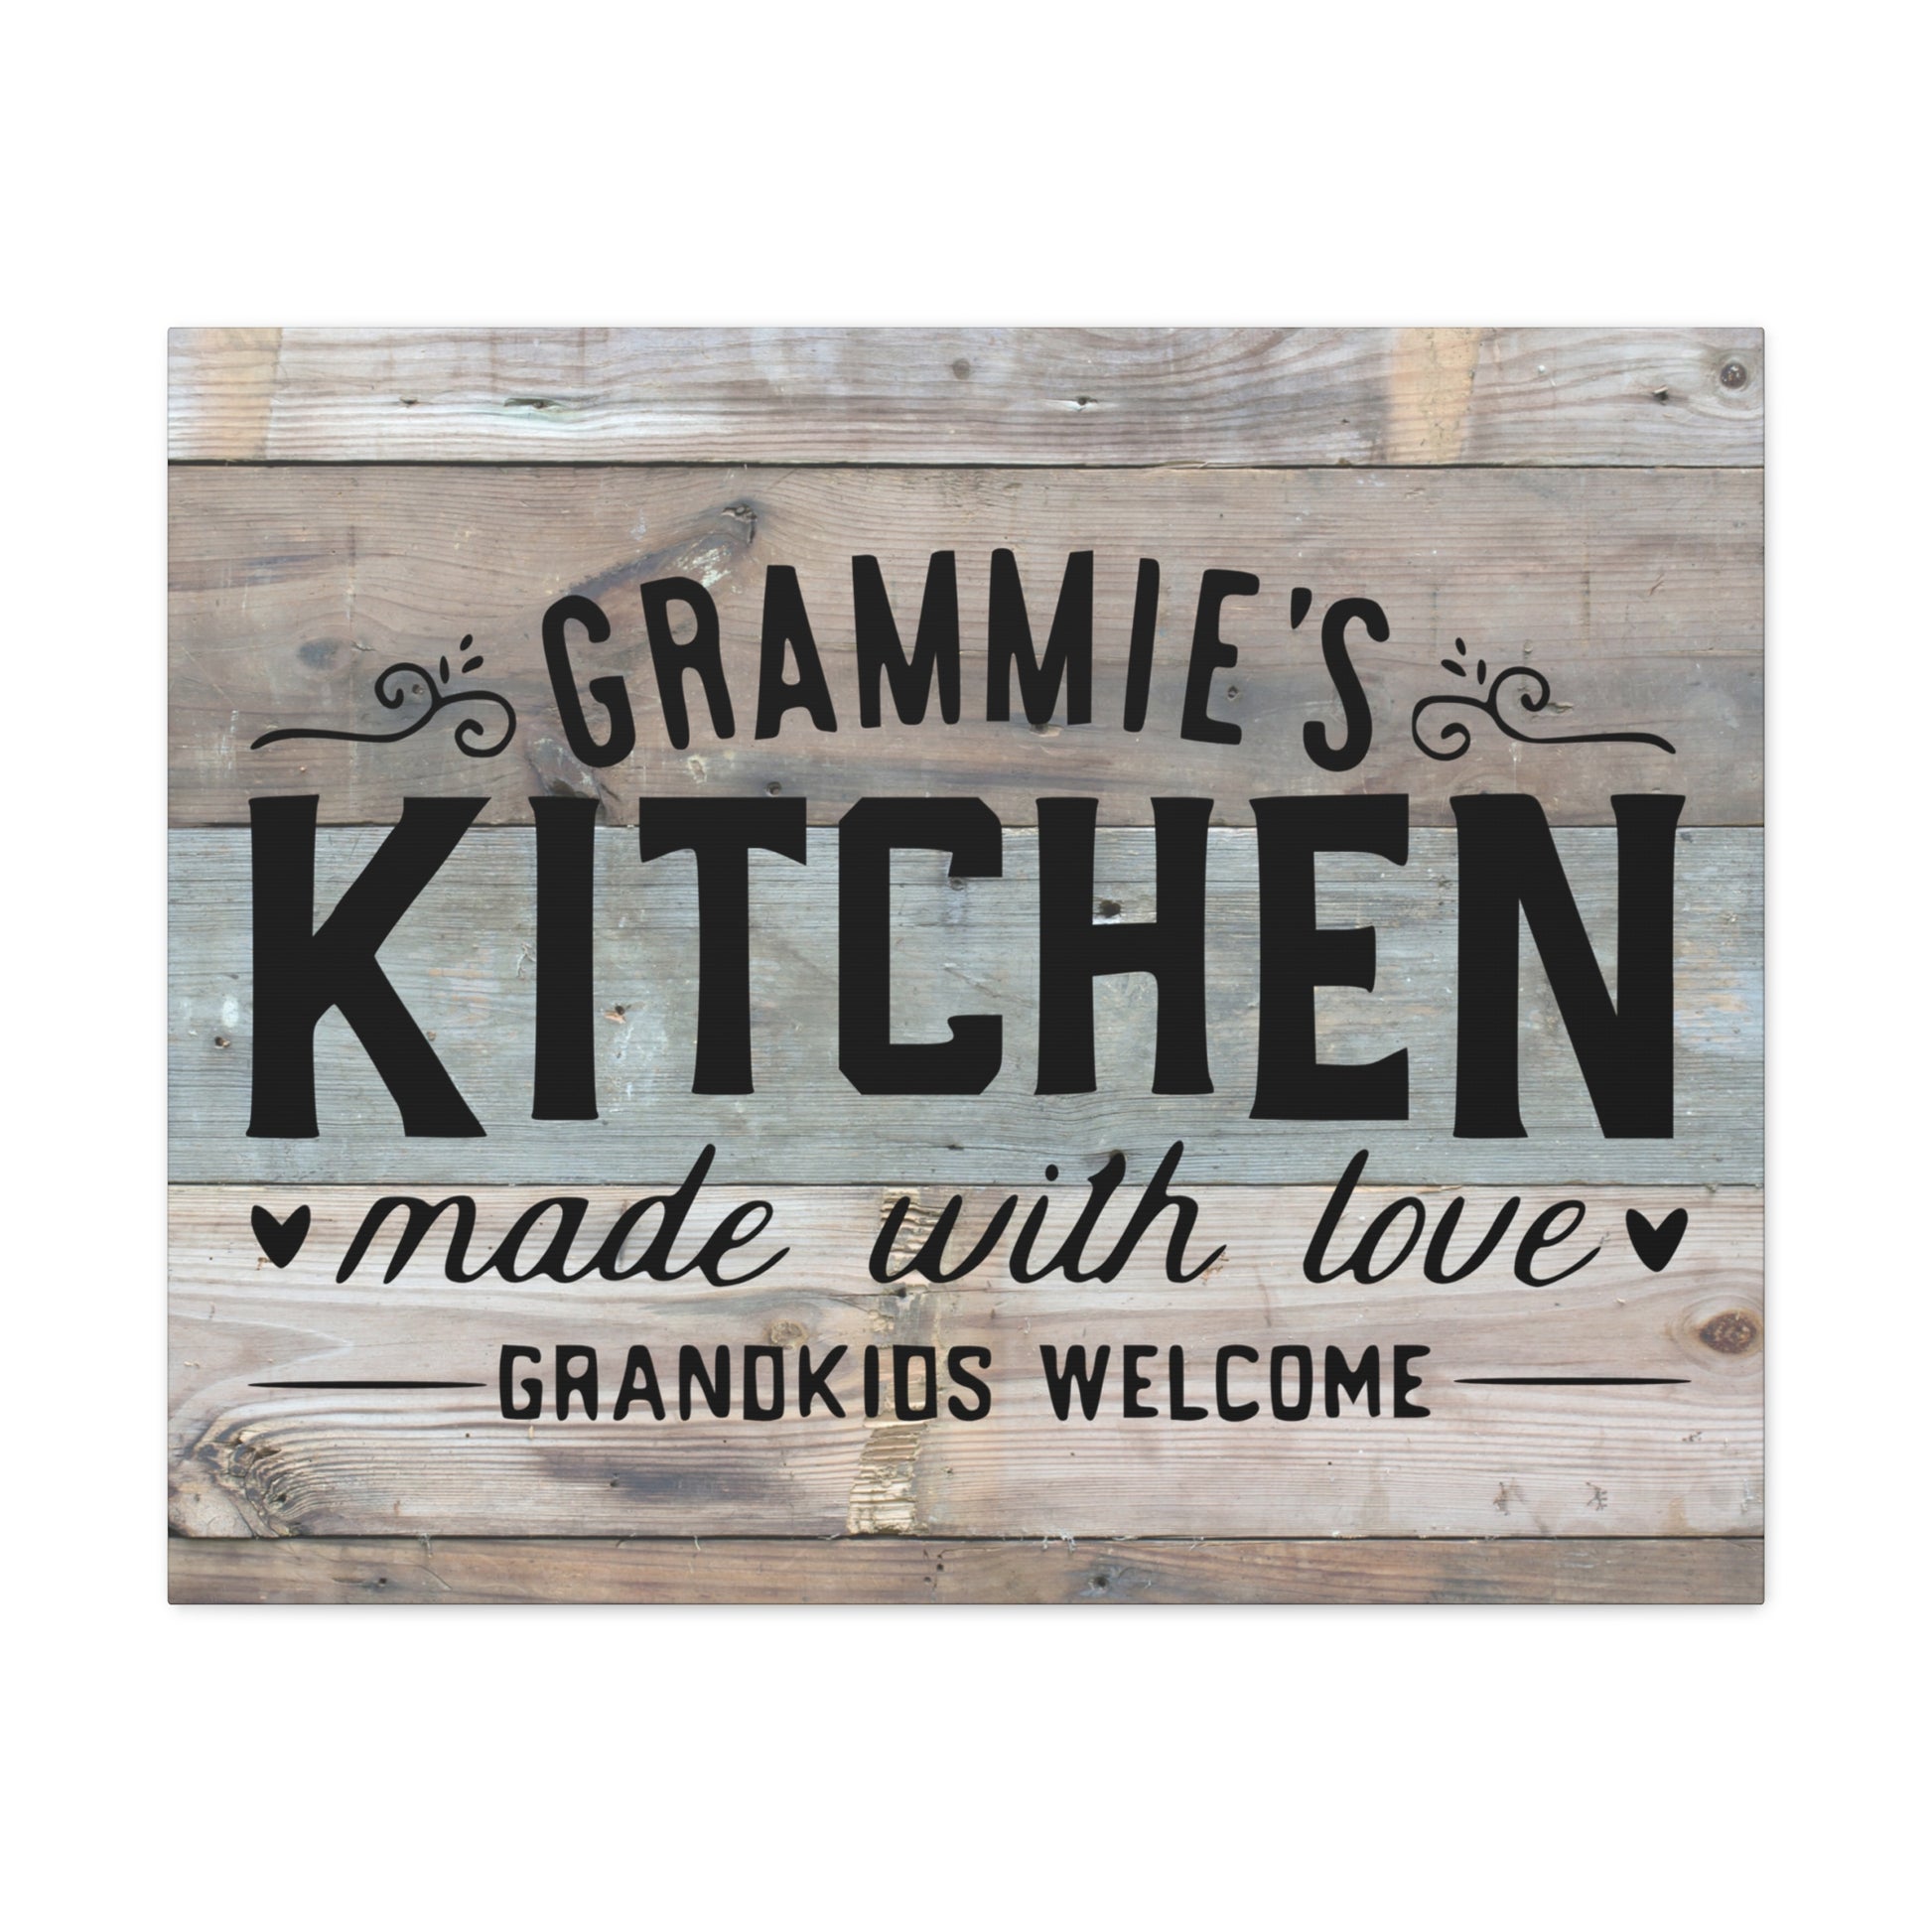 "Multicolor wood background canvas for Grammie’s kitchen decor"